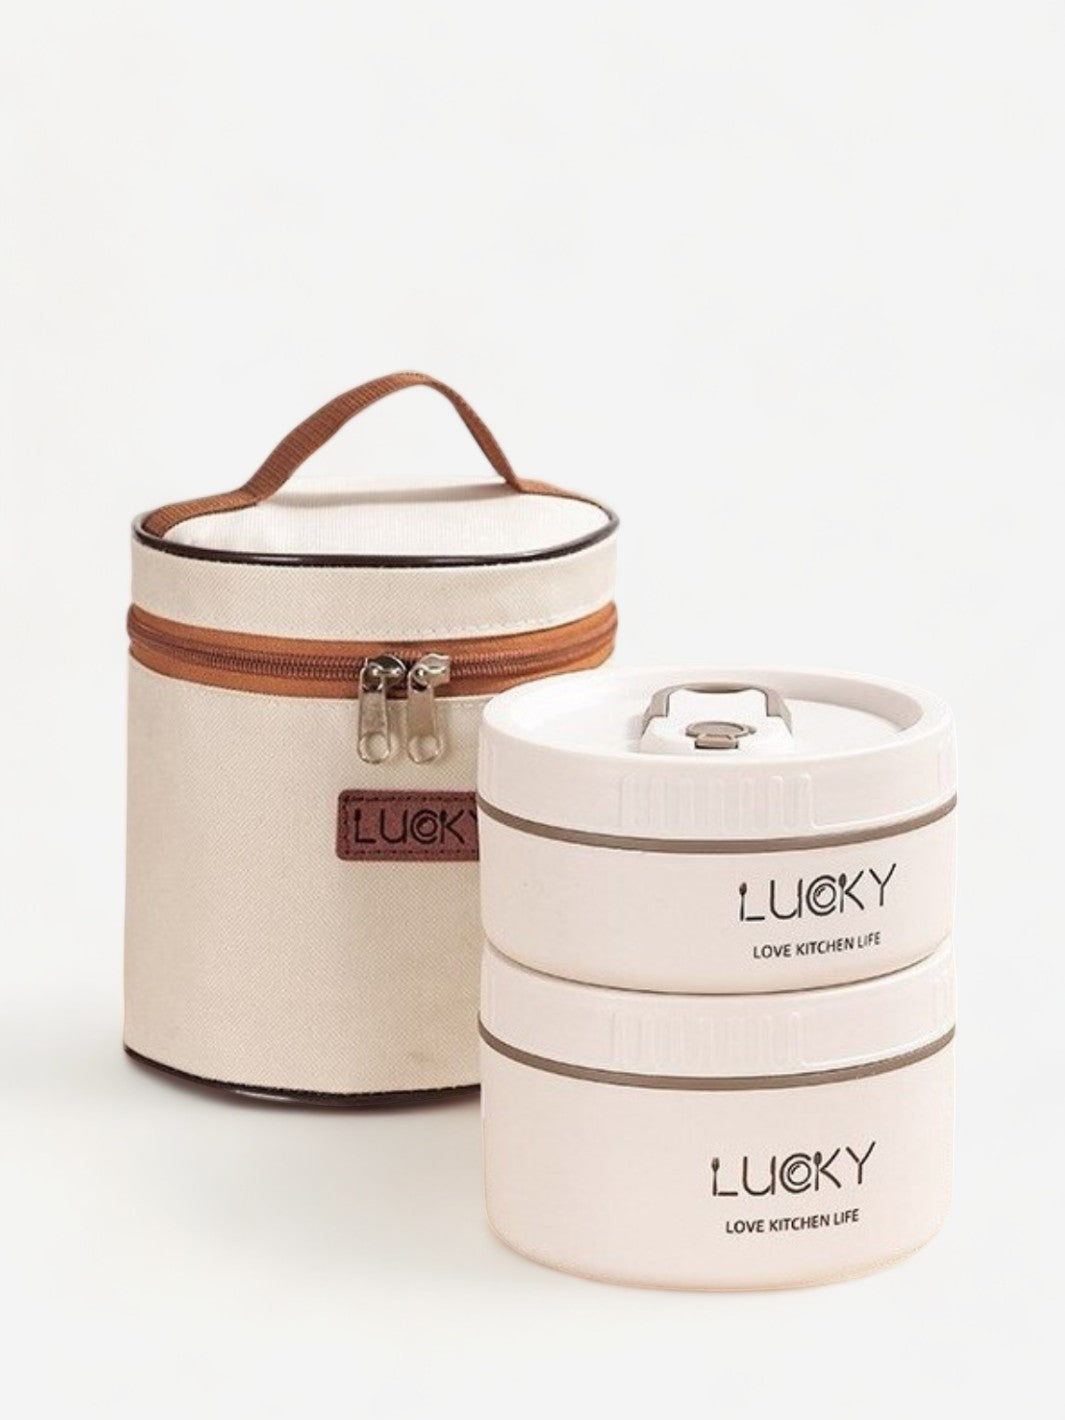 Coffret Lucky Lunch Box Isotherme